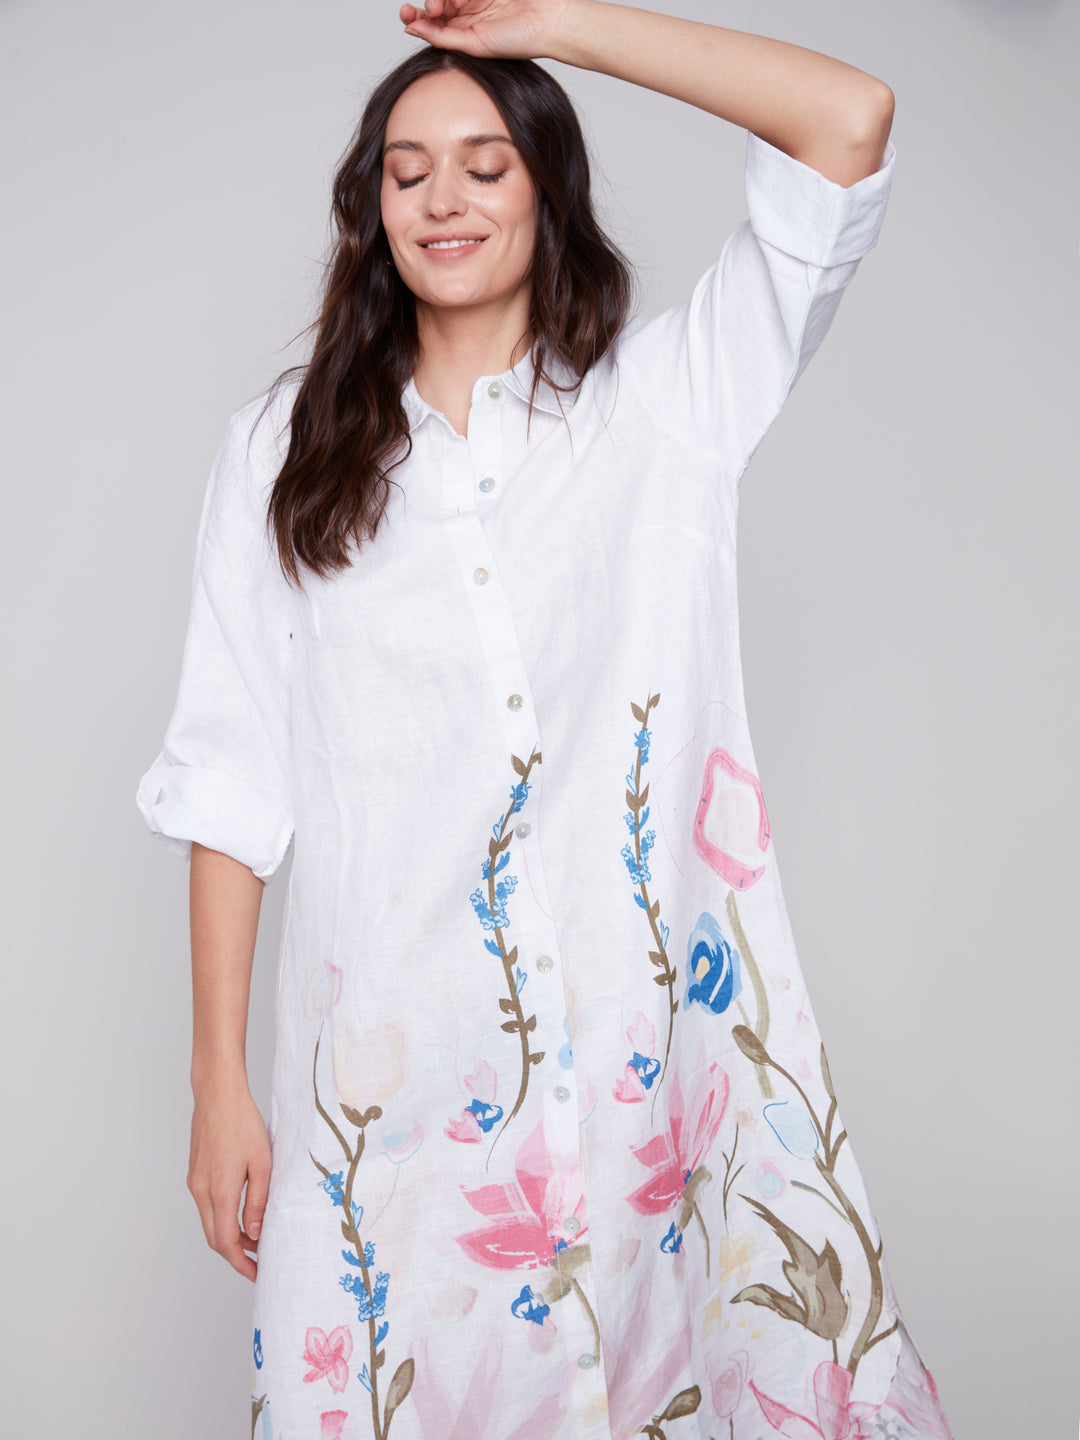 Charlie B spring 2024 women's casual linen long blouse duster shirt dress with floral print - detail